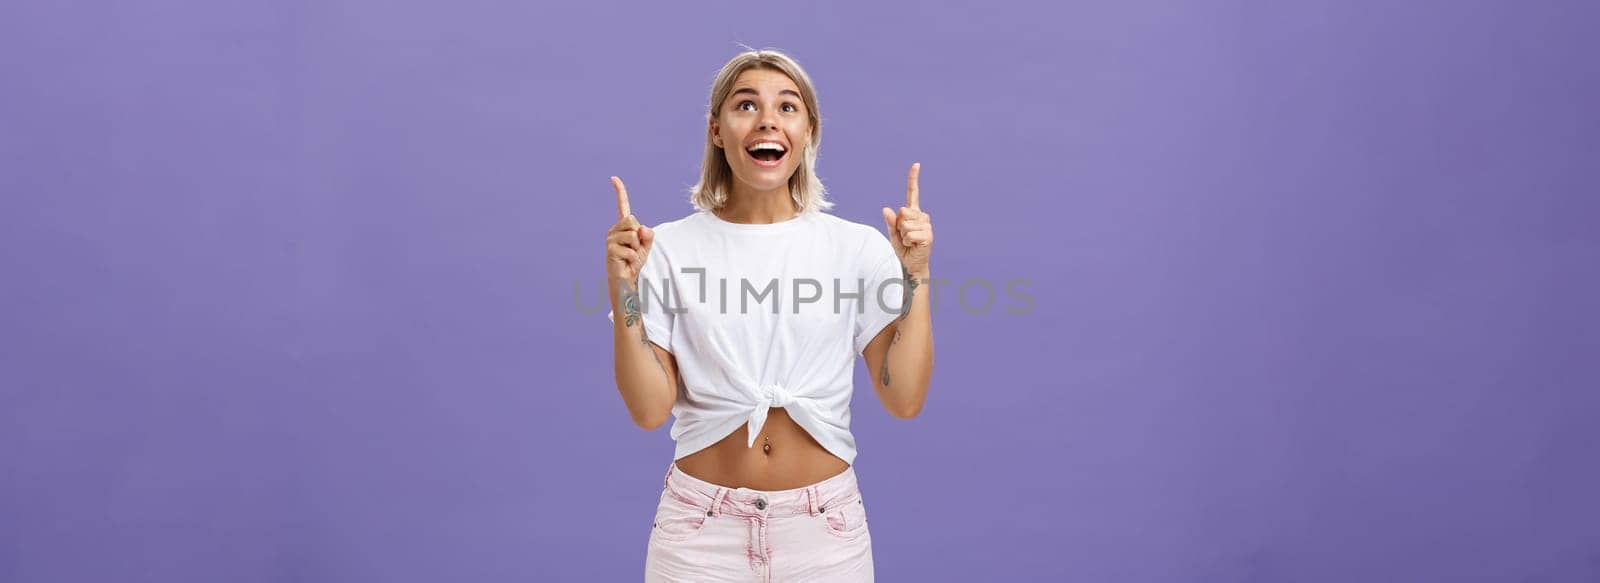 Woman seeing miracle being impressed and delighted like child staring and pointing up with broad thrilled smile standing over purple background in summer trendy outfit being joyful and excited by Benzoix